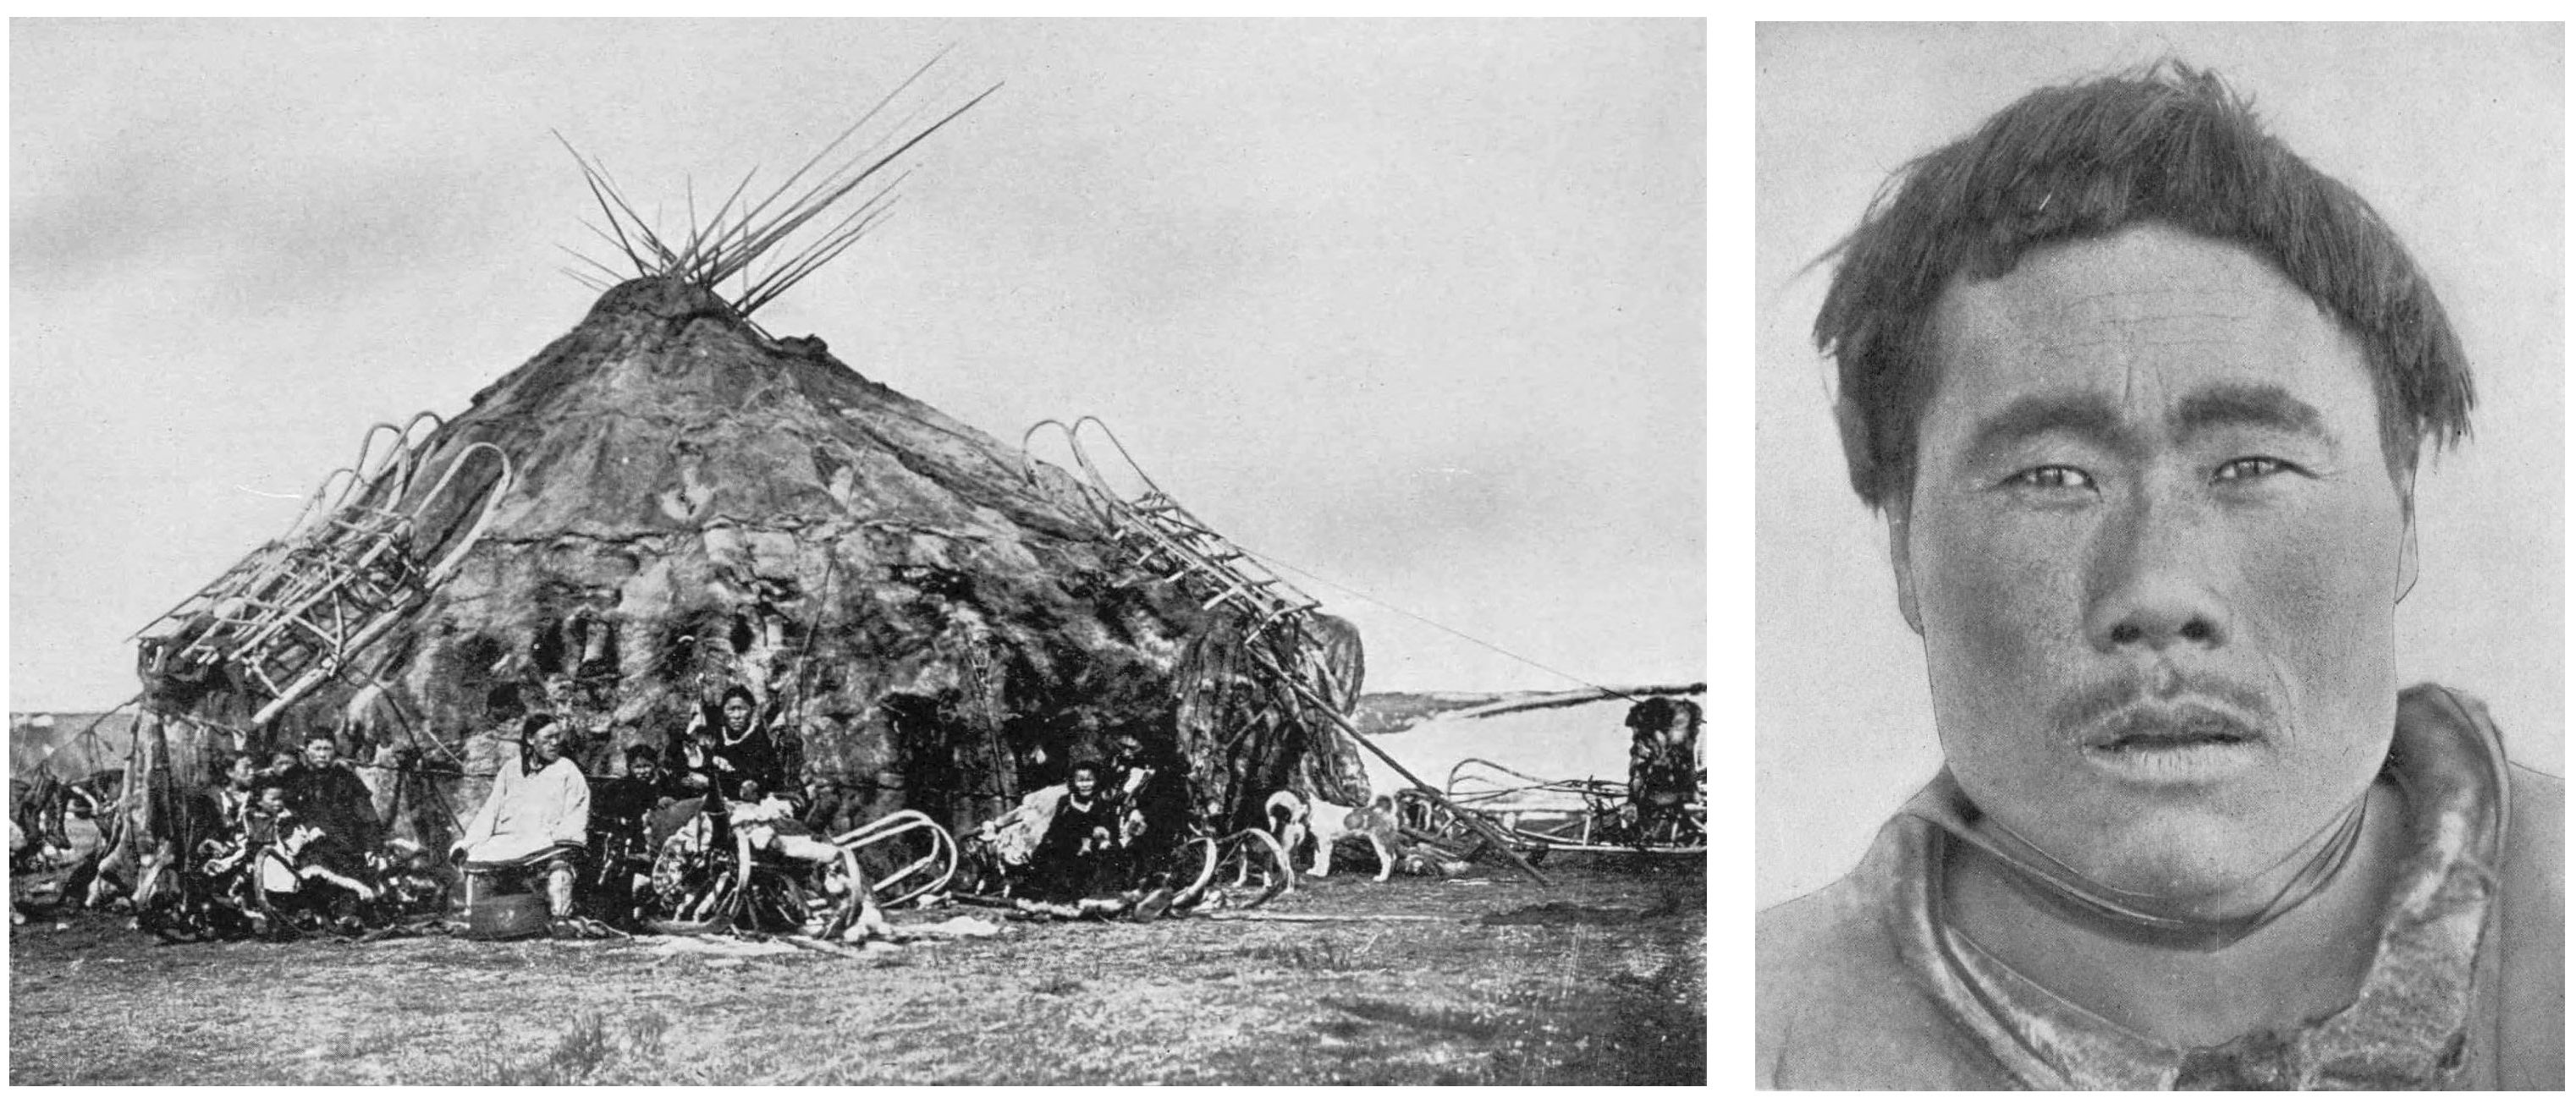 Kennan's first book, Tent Life in Siberia, provided the first glimpse of many remote tribes such as the nomadic Koraks. Kennan later was the only journalist among the founders of the National Geographic Society.